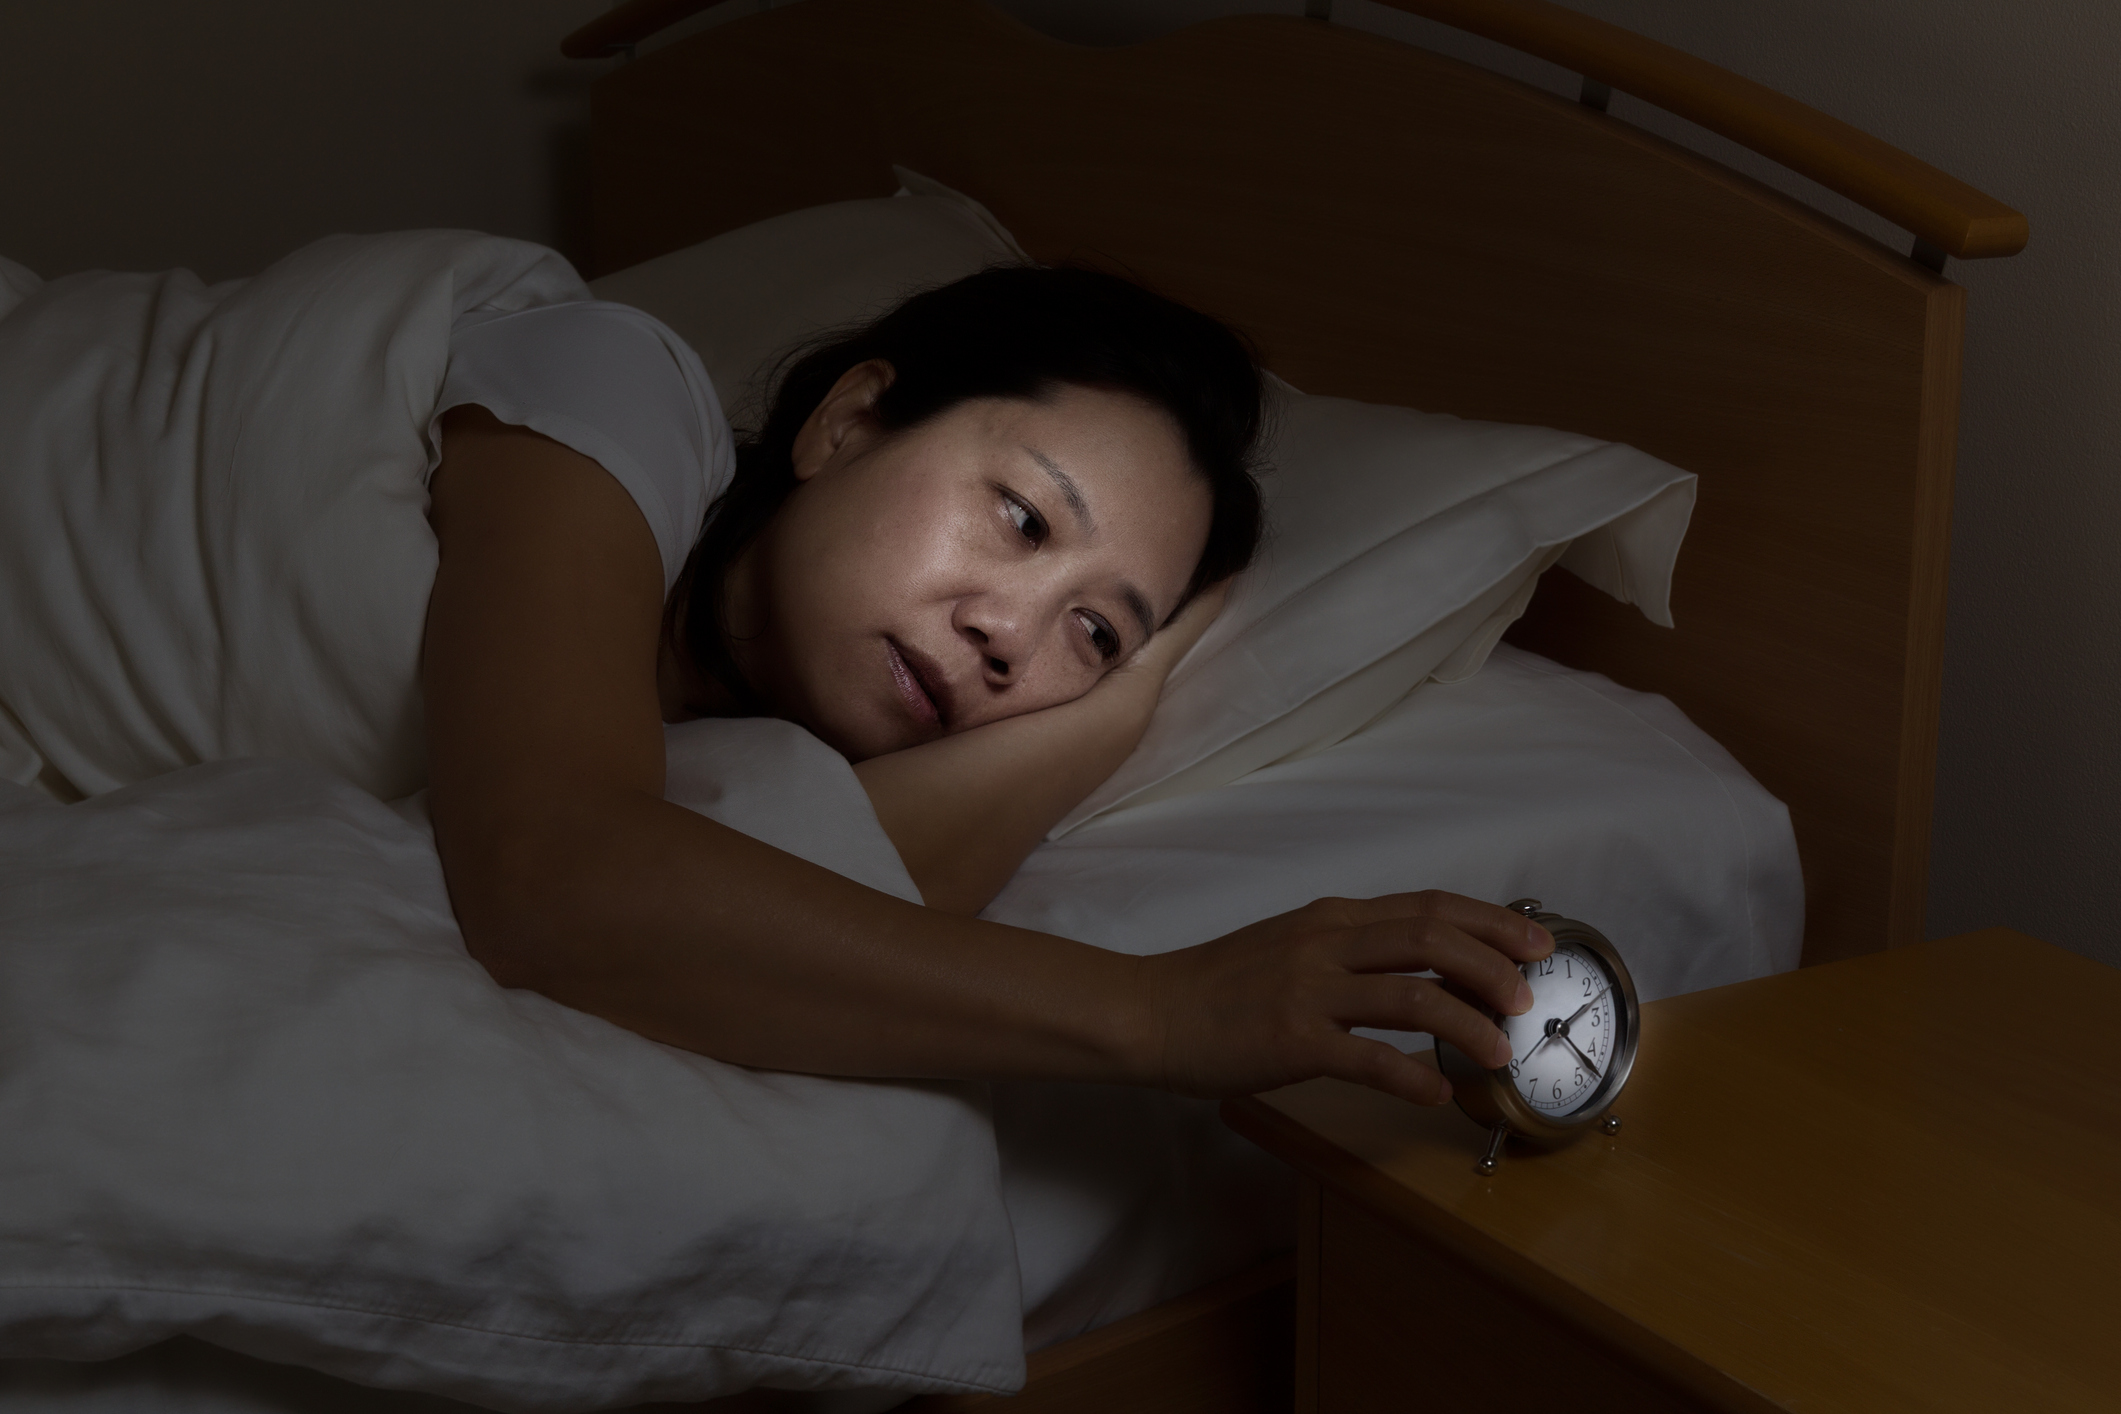 Woman in bed with eyes open touching clock on nightstand